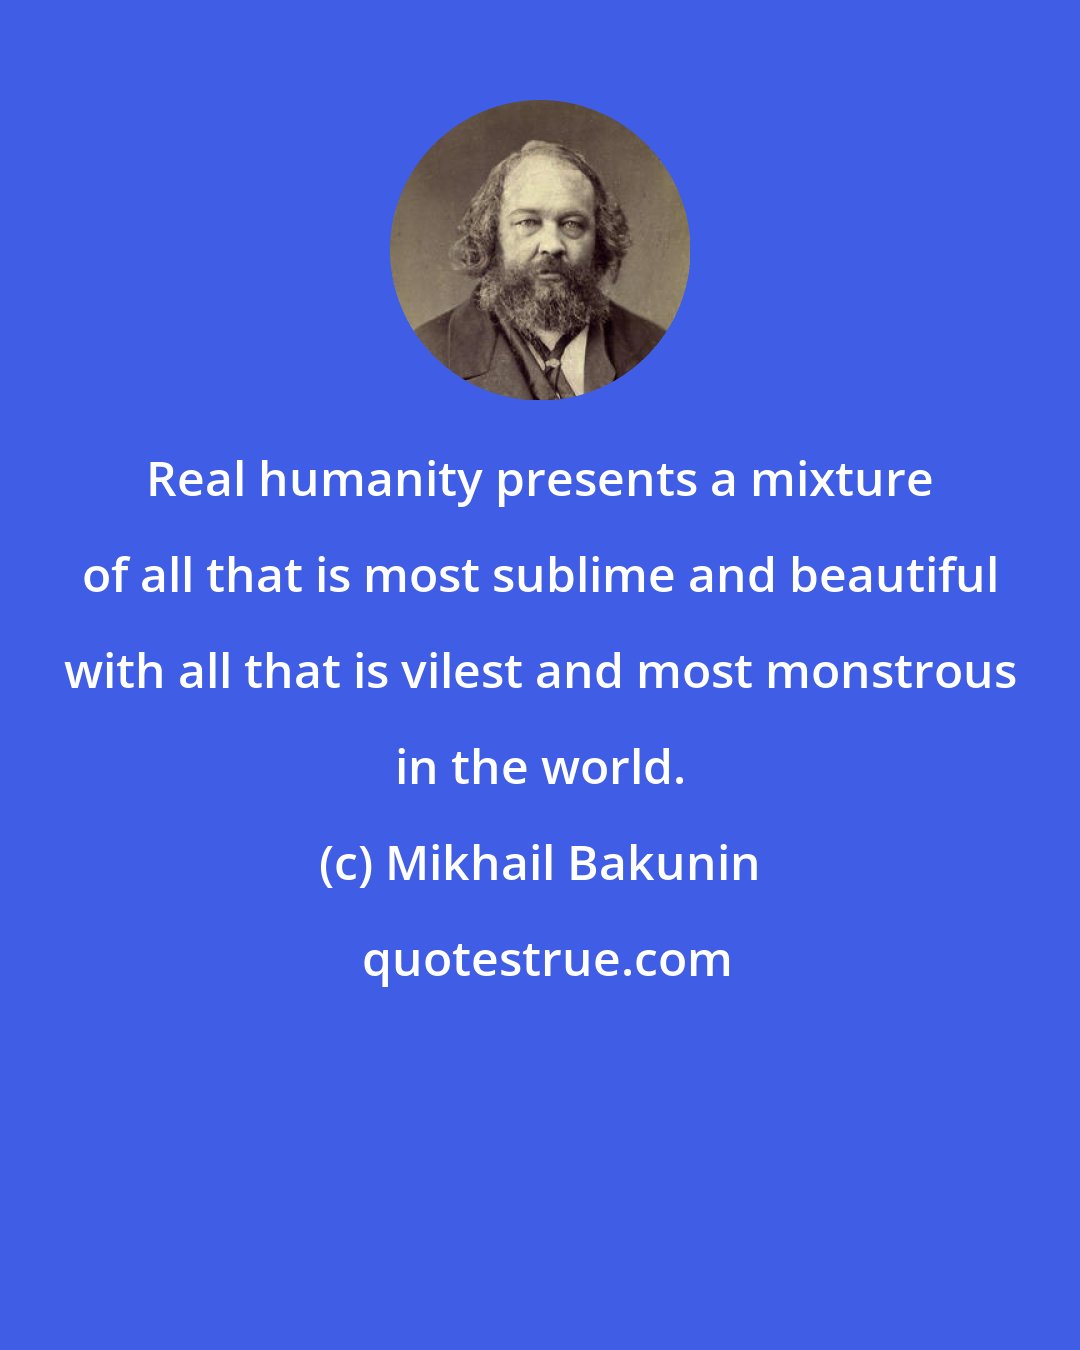 Mikhail Bakunin: Real humanity presents a mixture of all that is most sublime and beautiful with all that is vilest and most monstrous in the world.